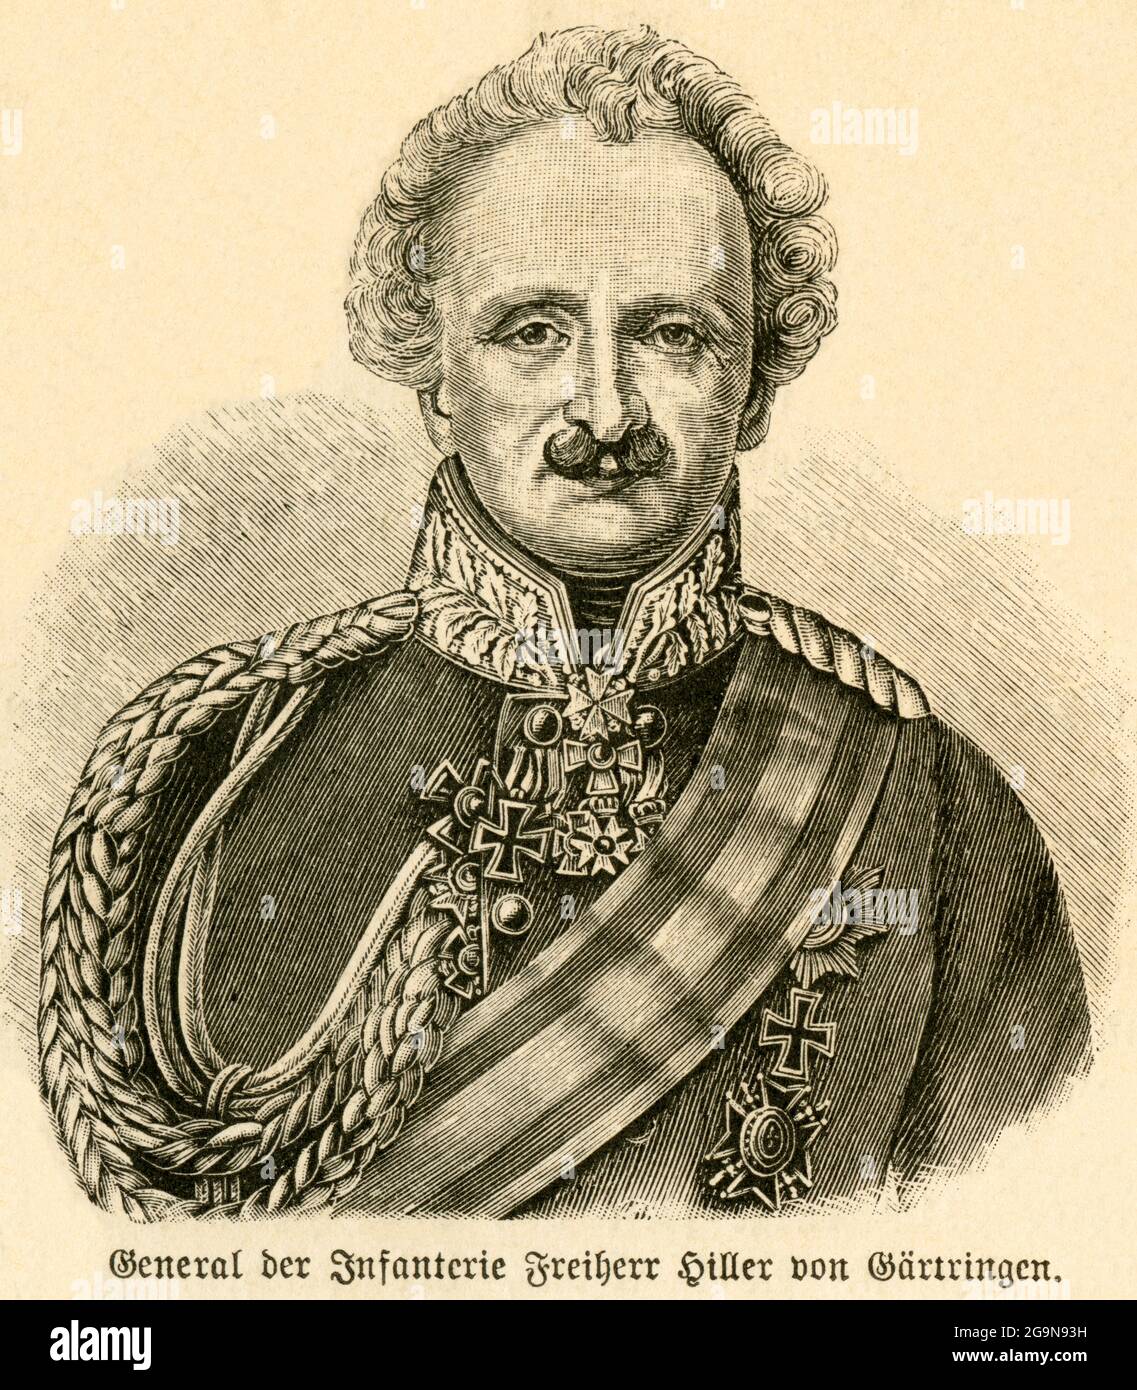 Europe, Germany, Saxony-Anhalt, Magdeburg, August Hiller von Gaertringen, Prussian general, infantry, ARTIST'S COPYRIGHT HAS NOT TO BE CLEARED Stock Photo